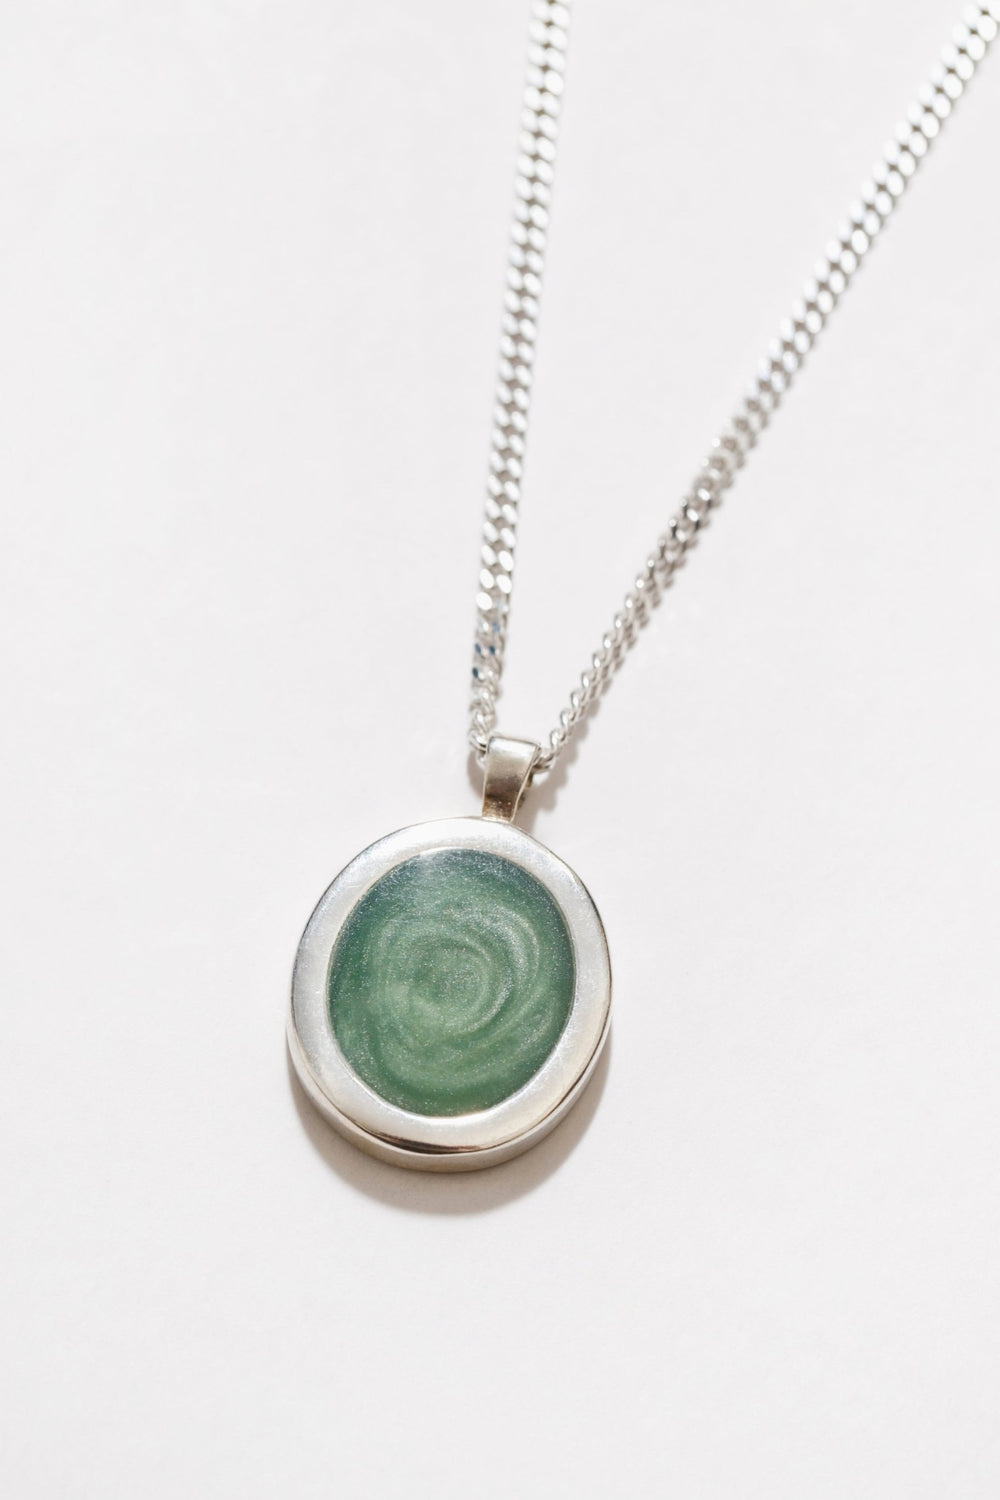 Silver + Green Tosh Necklace